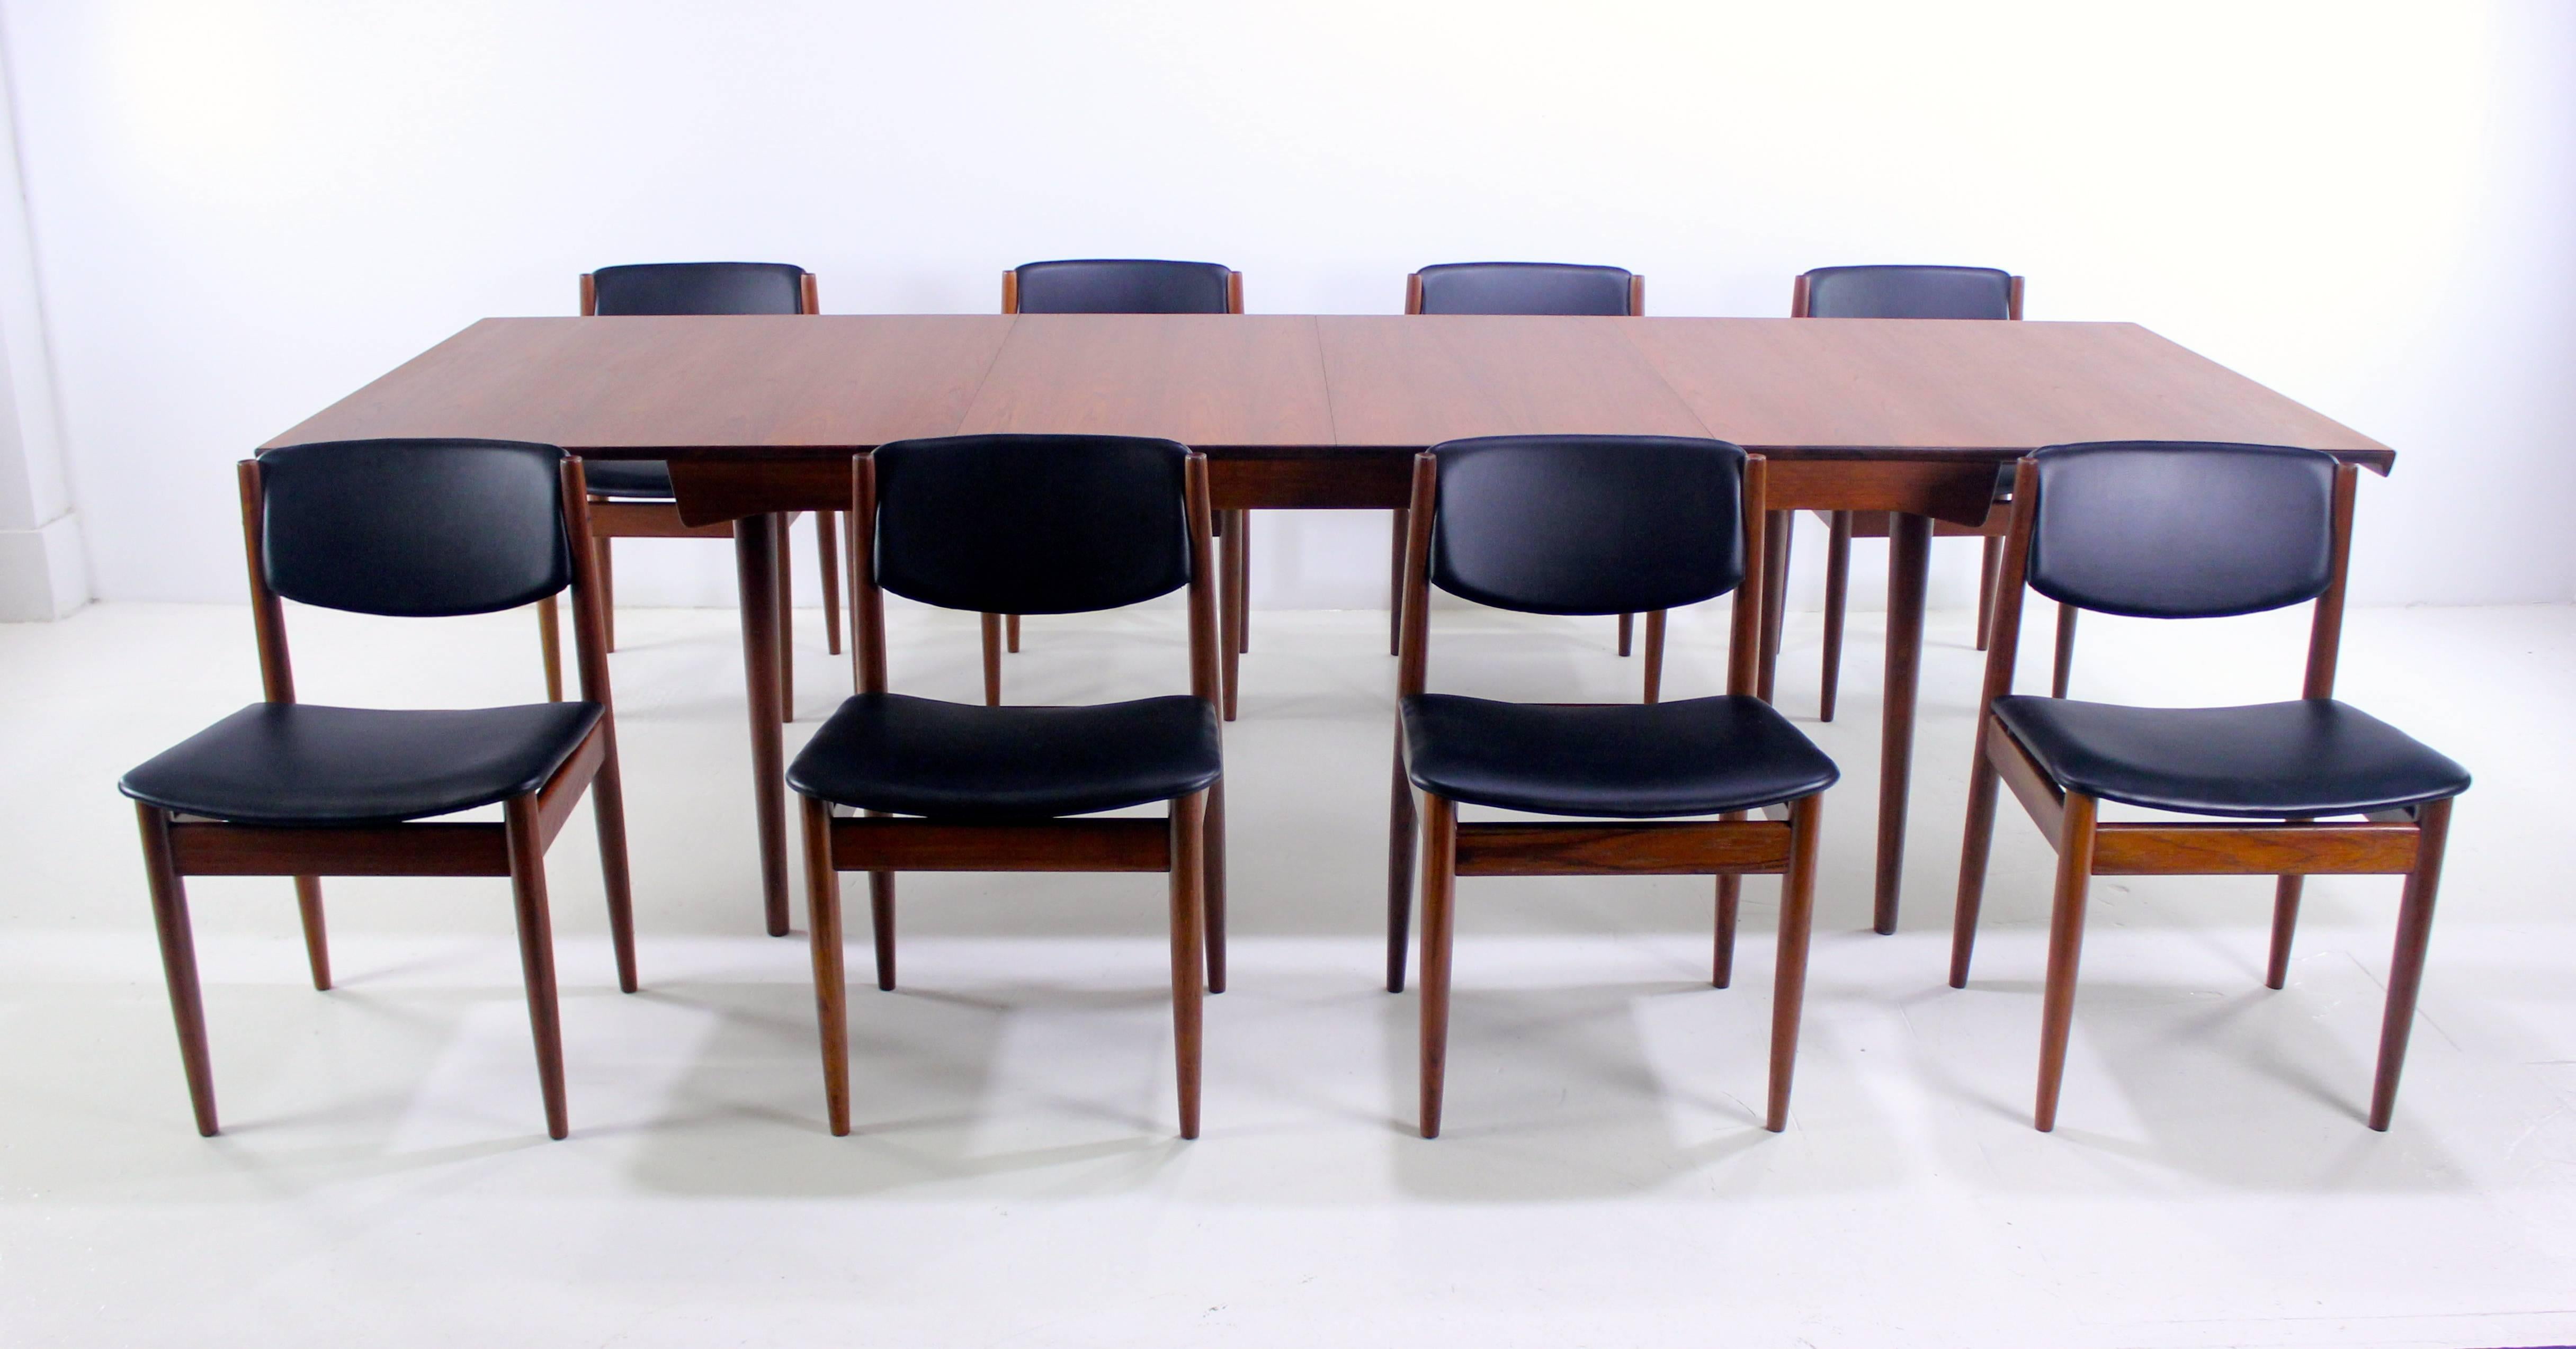 High-style Danish modern dining table with eight chairs designed by Finn Juhl.
France & Son, maker.
Richly grained teak.
Table, model #FD-540, has two 19.5" leaves providing a full extension of 112".
Eight chairs, measuring